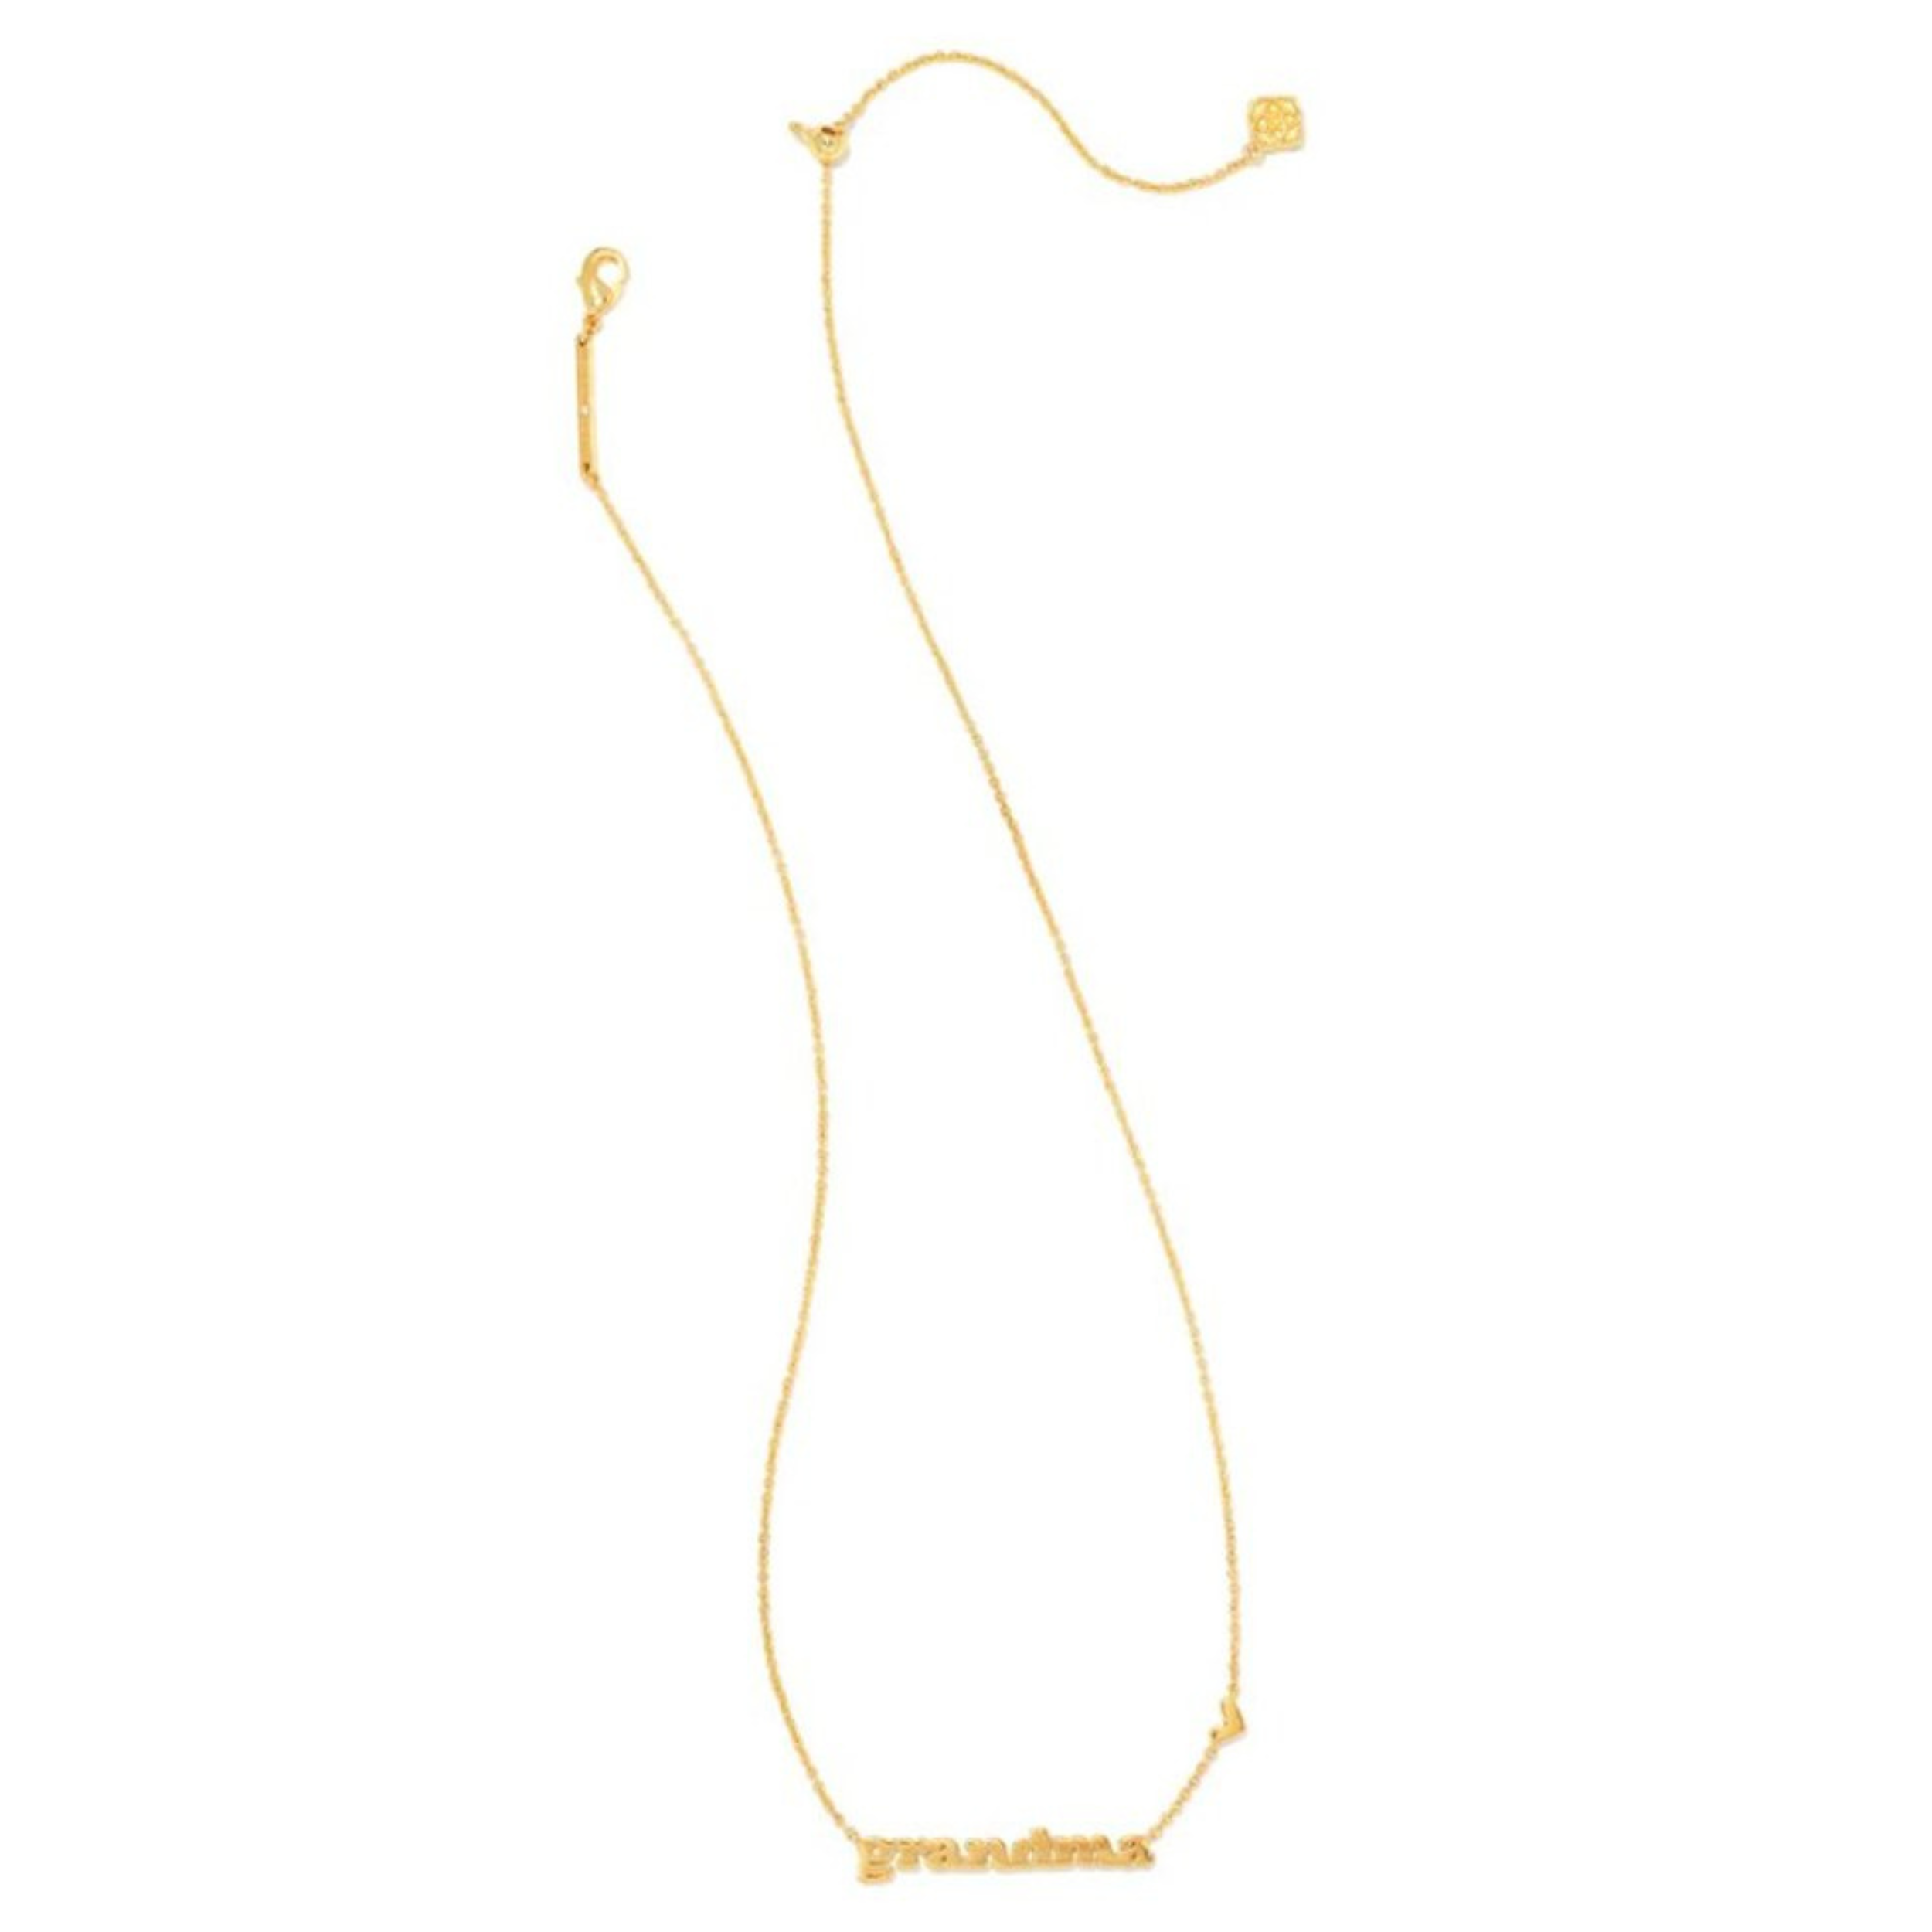 Kendra Scott | Kendra Scott Grandma Pendant Necklace in Gold - Giddy Up Glamour Boutique